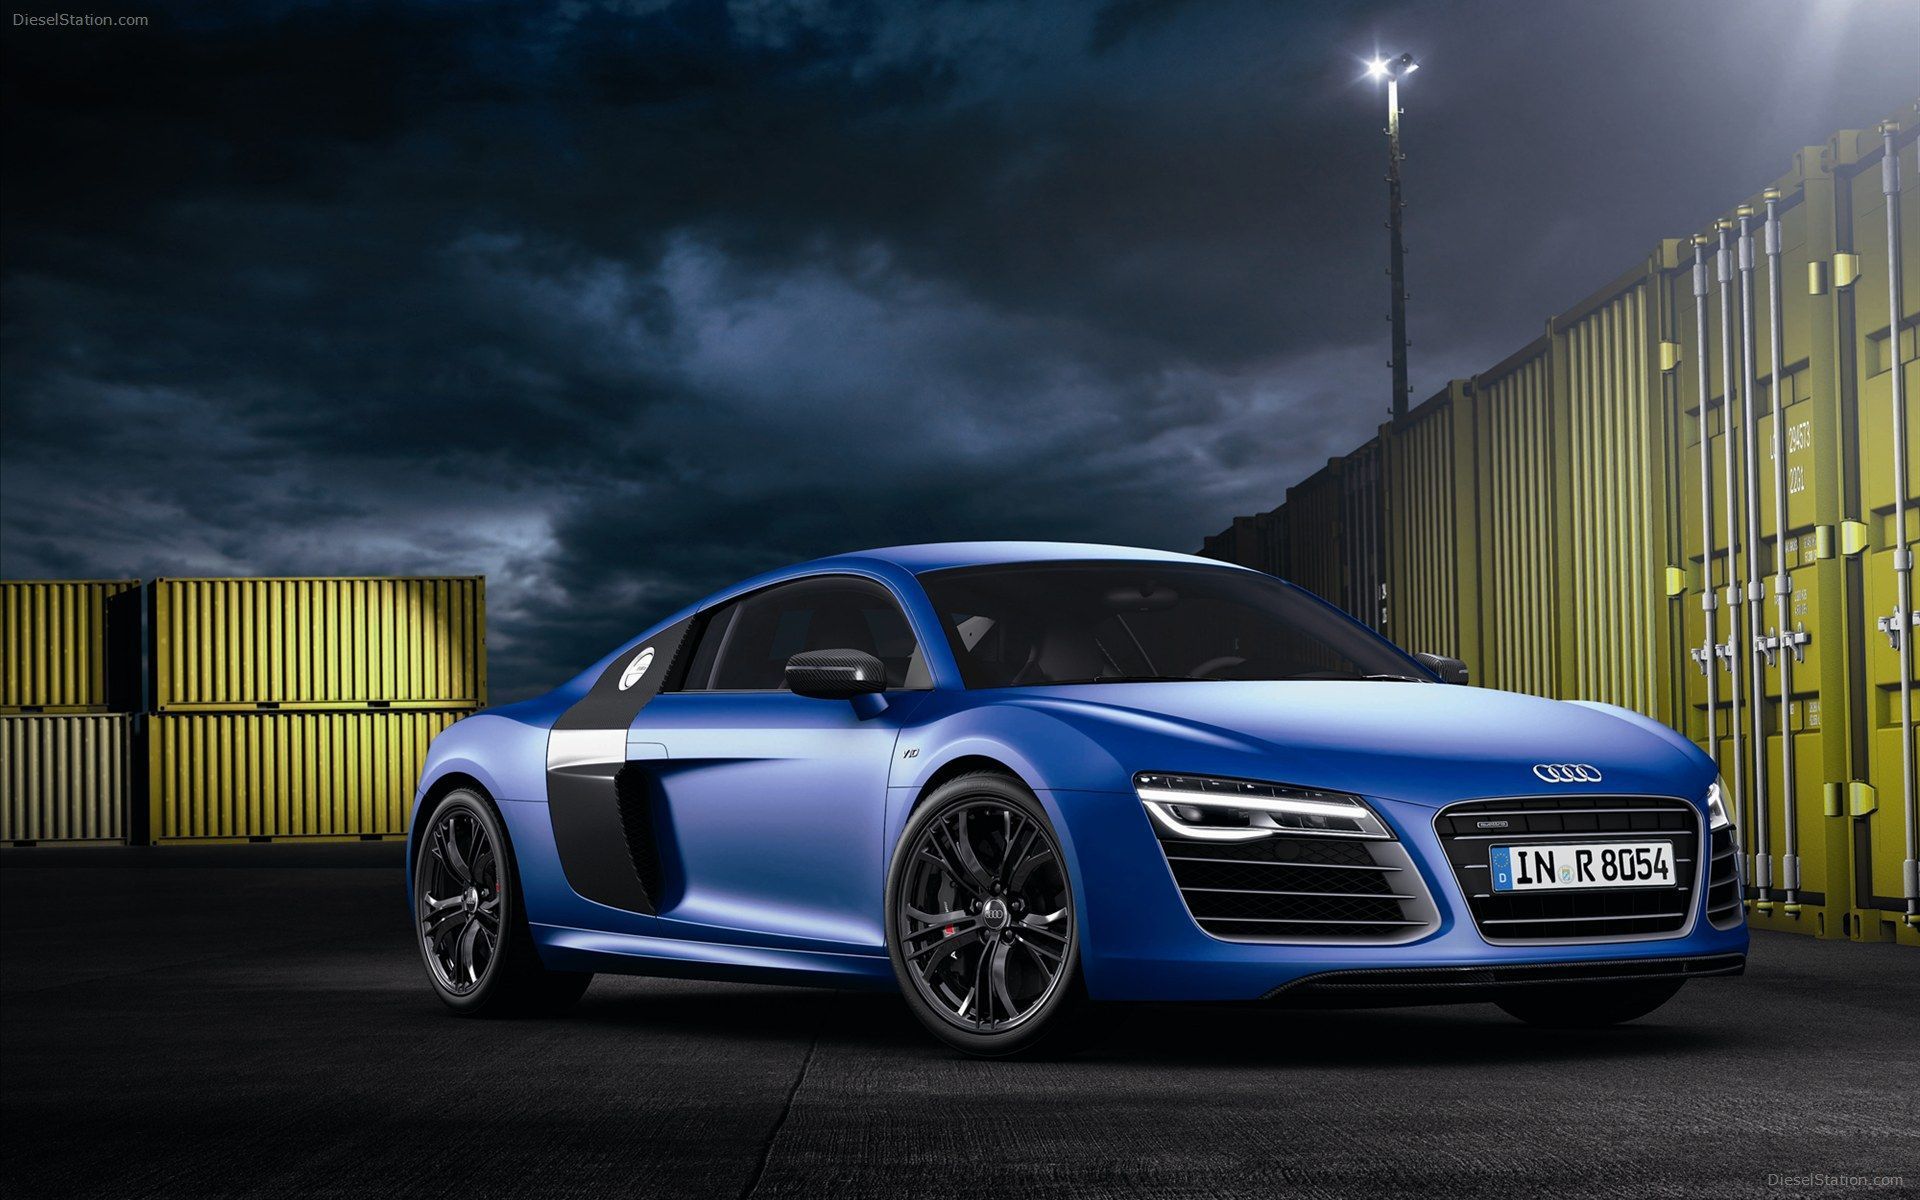 Download Stunning Audi R8 Top View Free Image Full Size #3293 ...